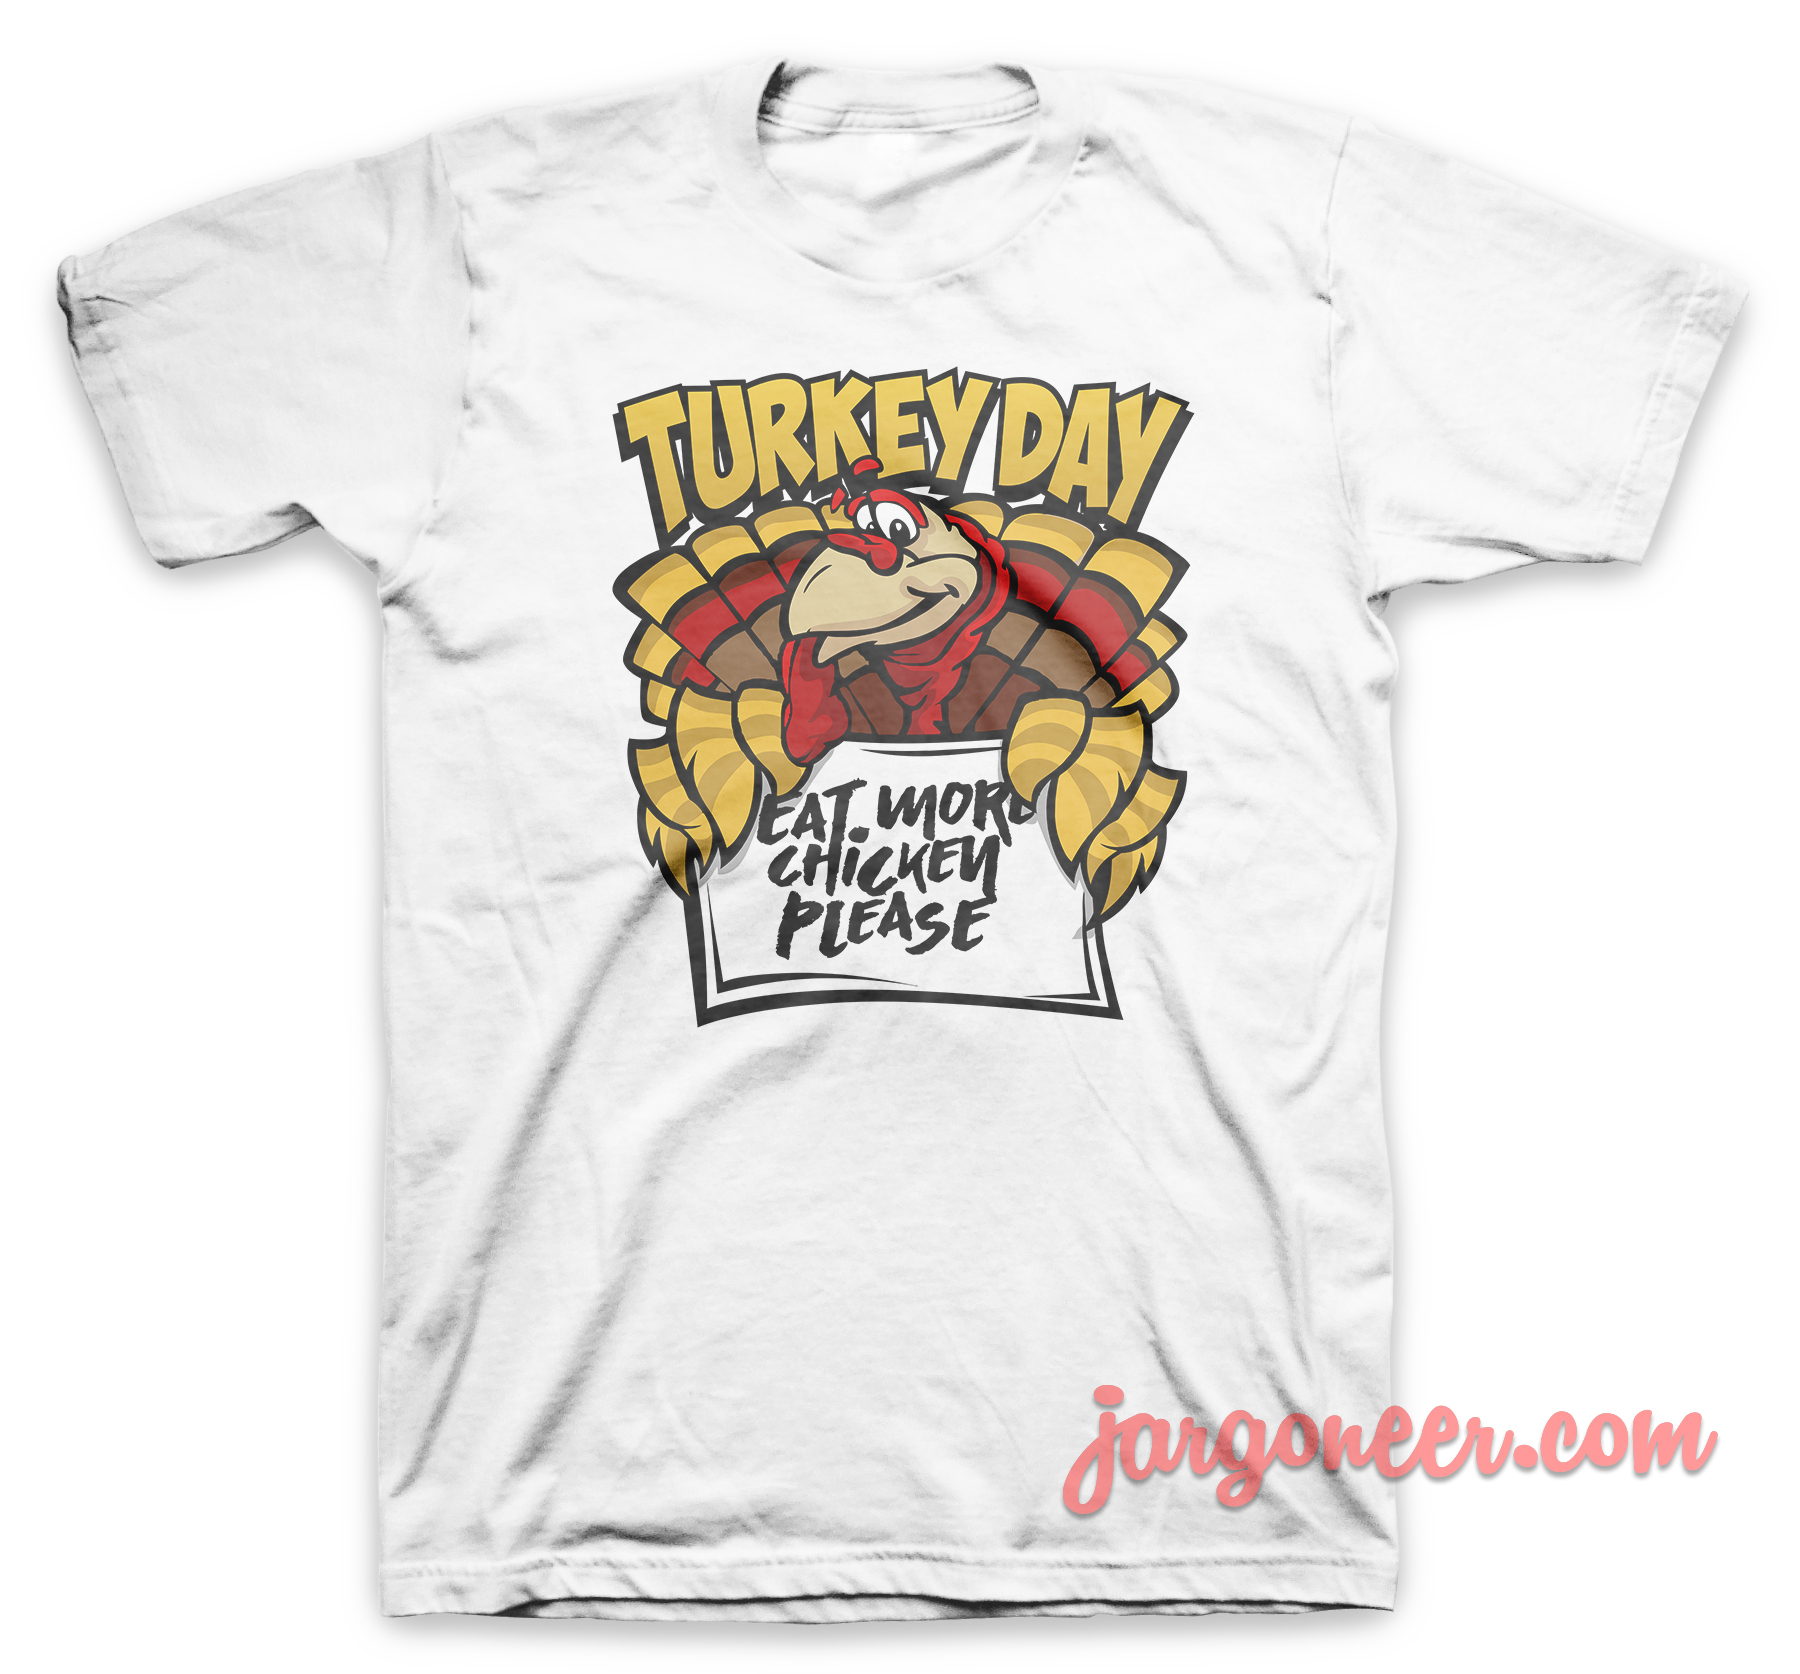 Happy Turkey Dat And Eat More Chicken White T Shirt - Shop Unique Graphic Cool Shirt Designs